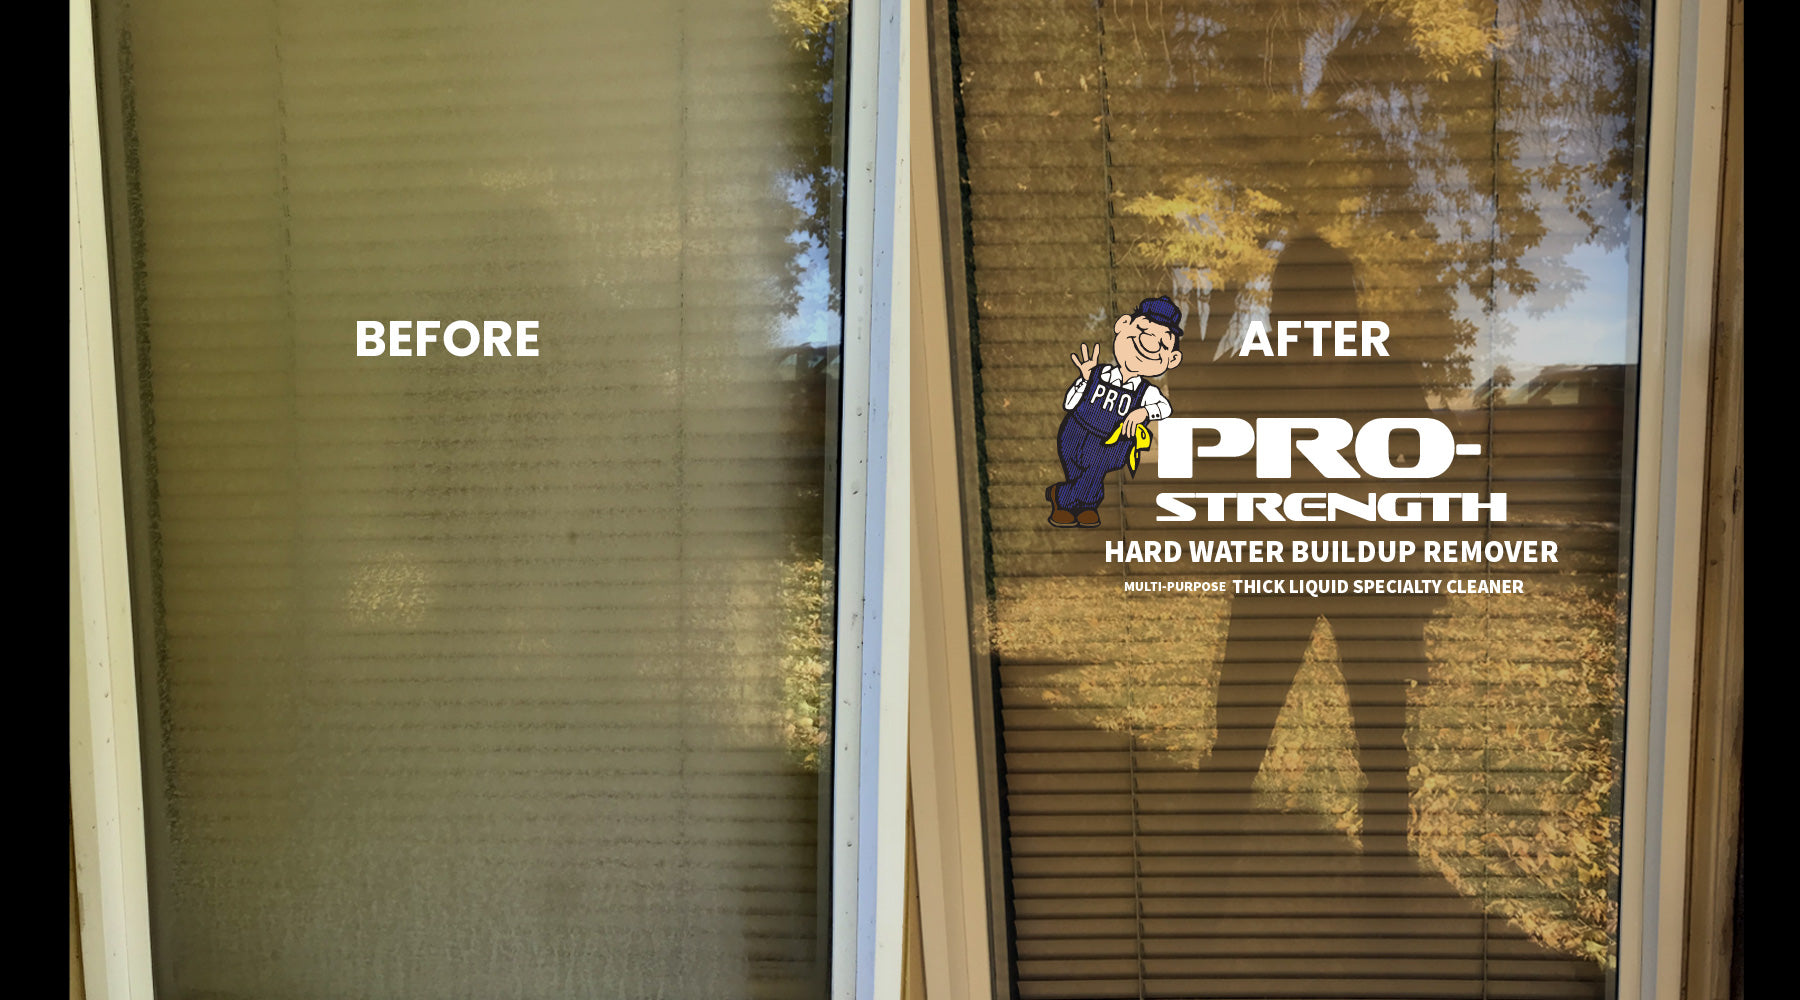 Before & After Hard Water Build Up Remover - ProStrength